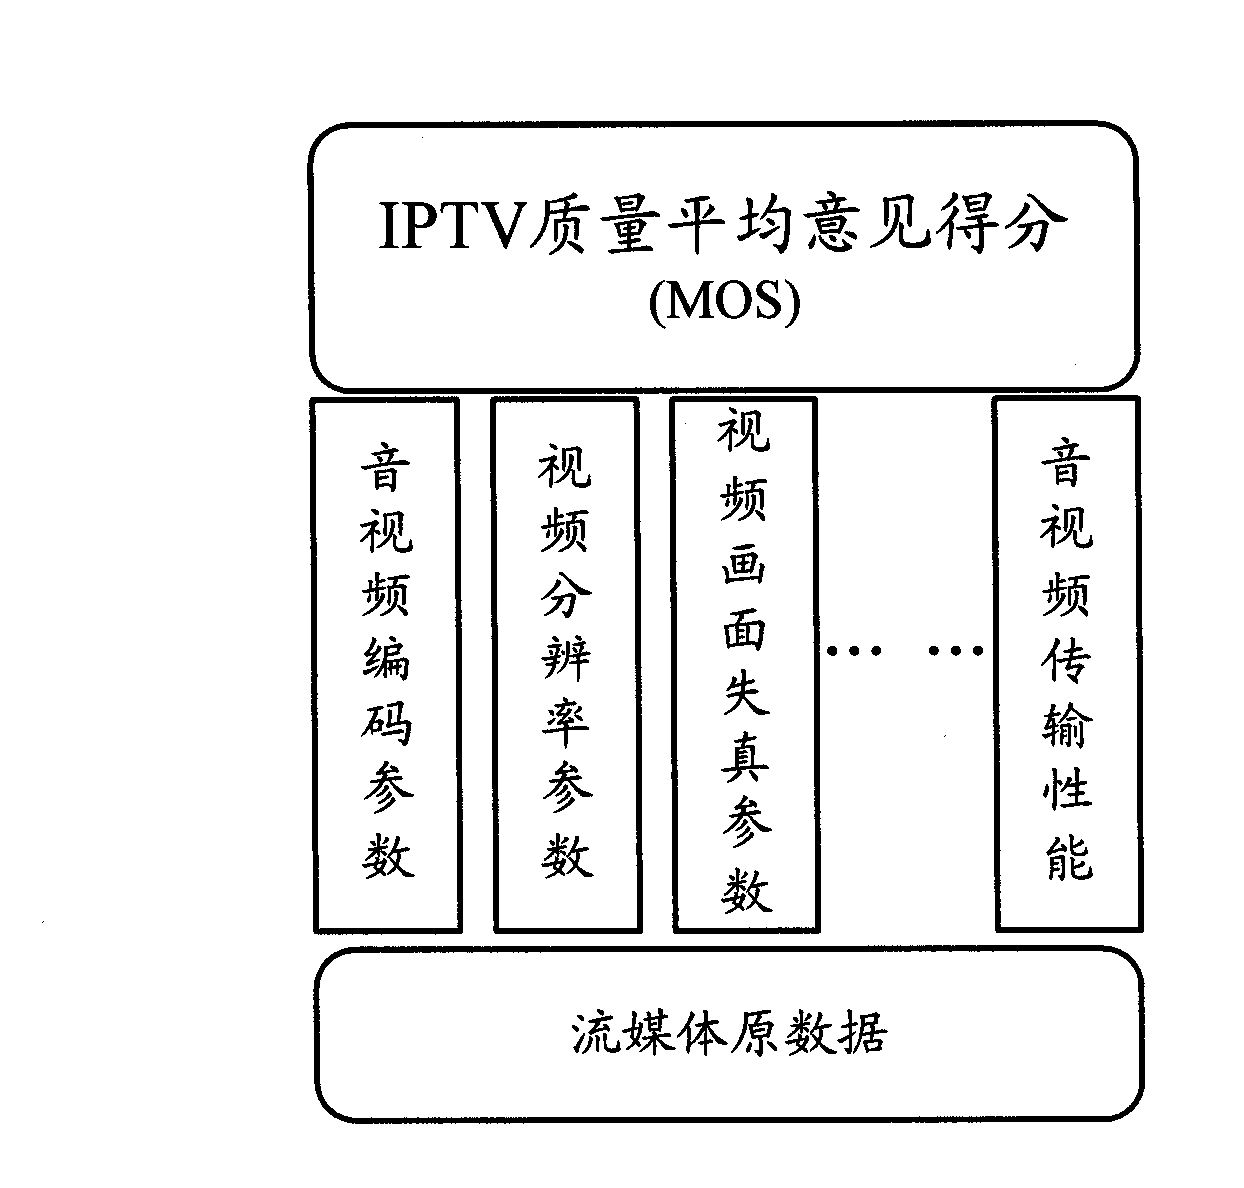 Device and method for estimating quality of experience (QoE) for internet protocol television (IPTV) user